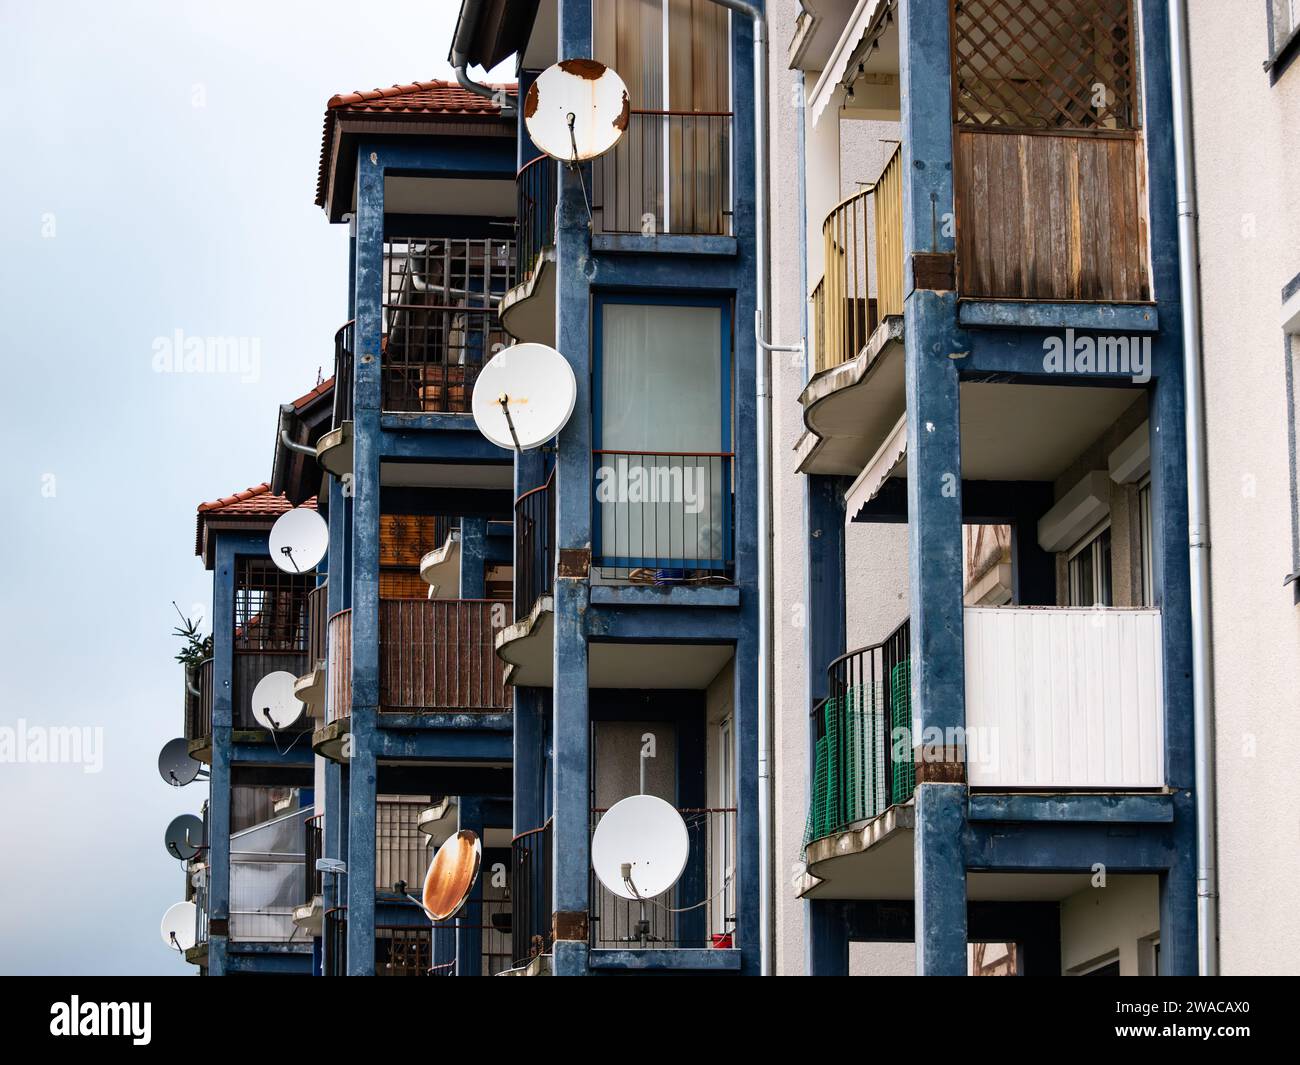 Satellite dishes mounted to balconies of a big apartment building. Technology to receive tv channels. The residential district seems to be poor. Stock Photo